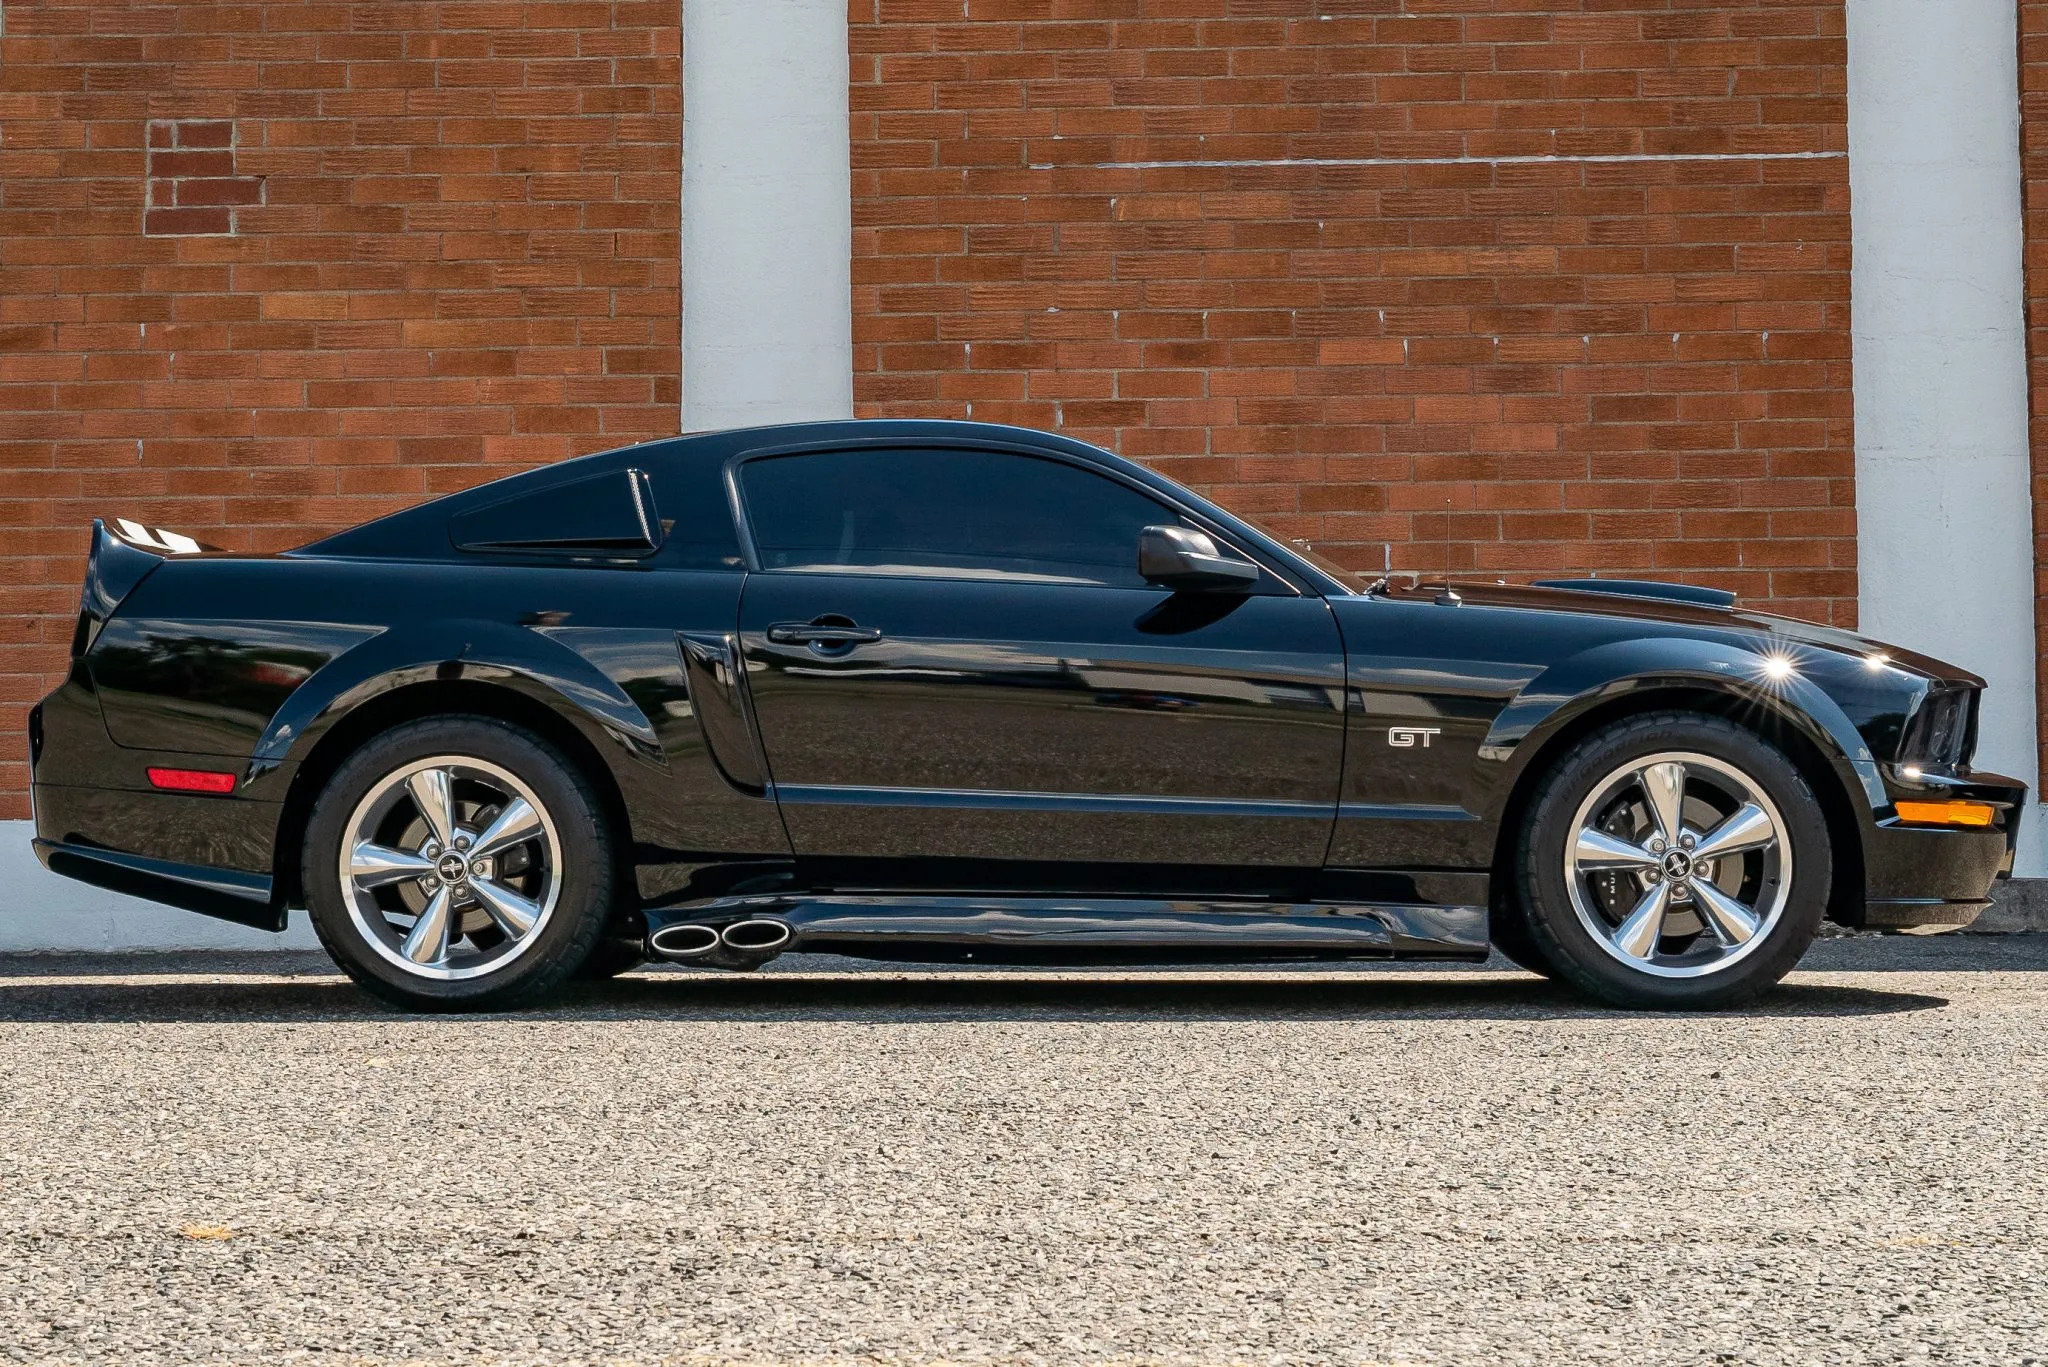 2008 Ford Mustang GT Coupe